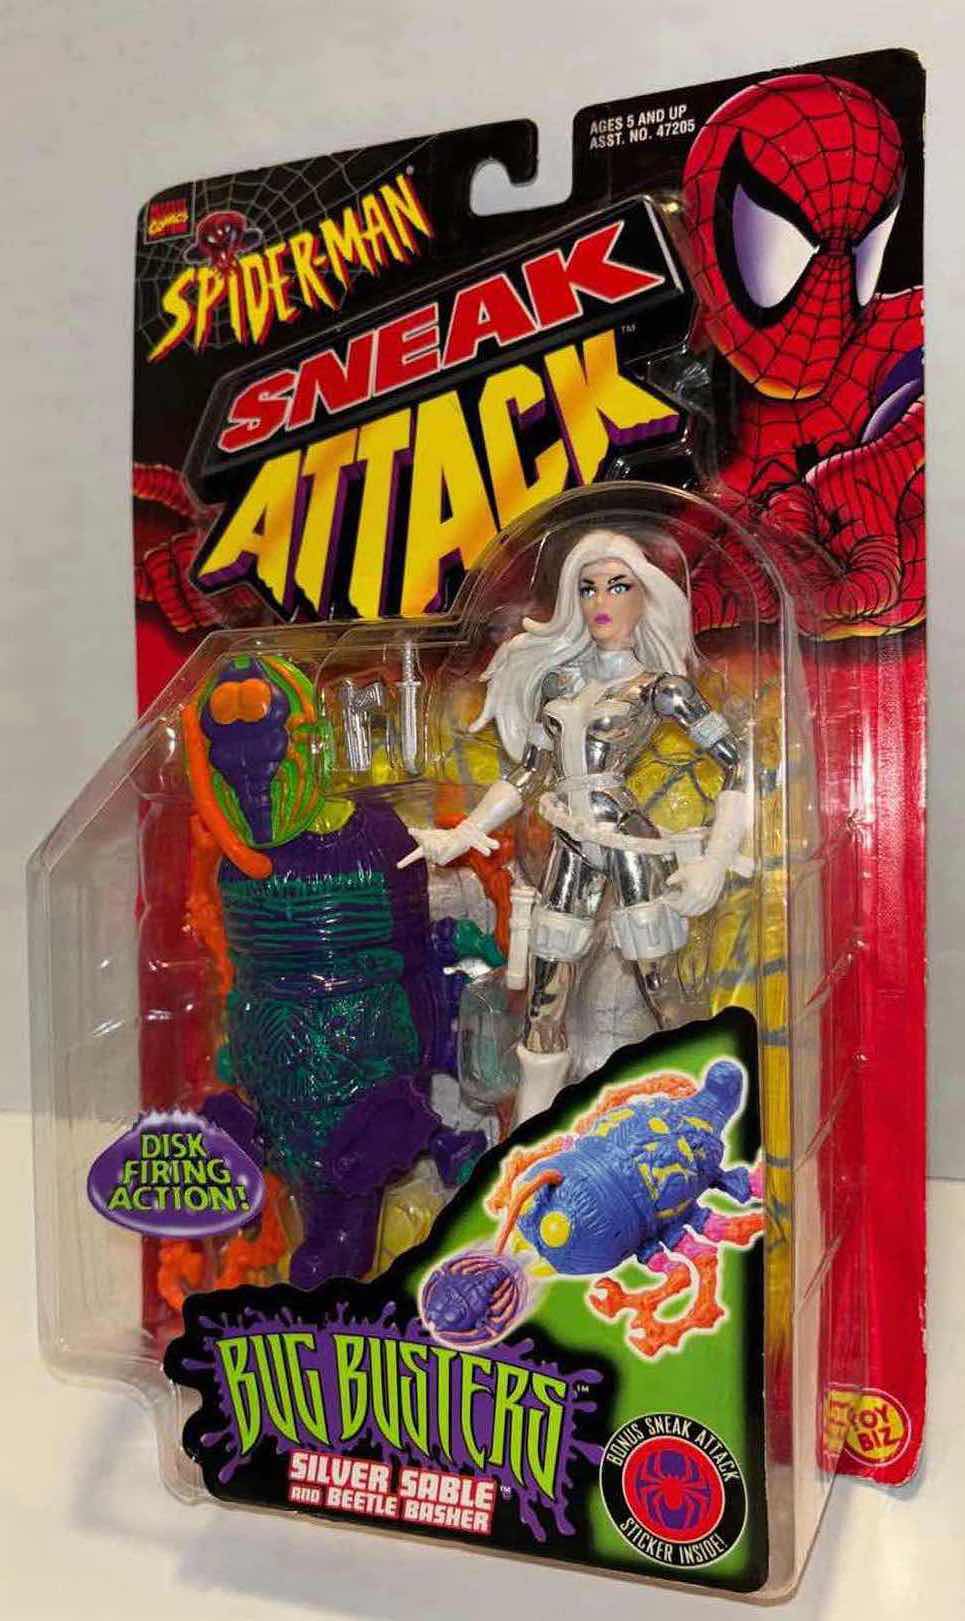 Photo 1 of NEW 1998 TOY BIZ MARVEL COMICS SPIDER-MAN SNEAK ATTACK BUG BUSTERS ACTION FIGURE & ACCESSORIES “SILVER SABLE AND BEETLE BASHER”